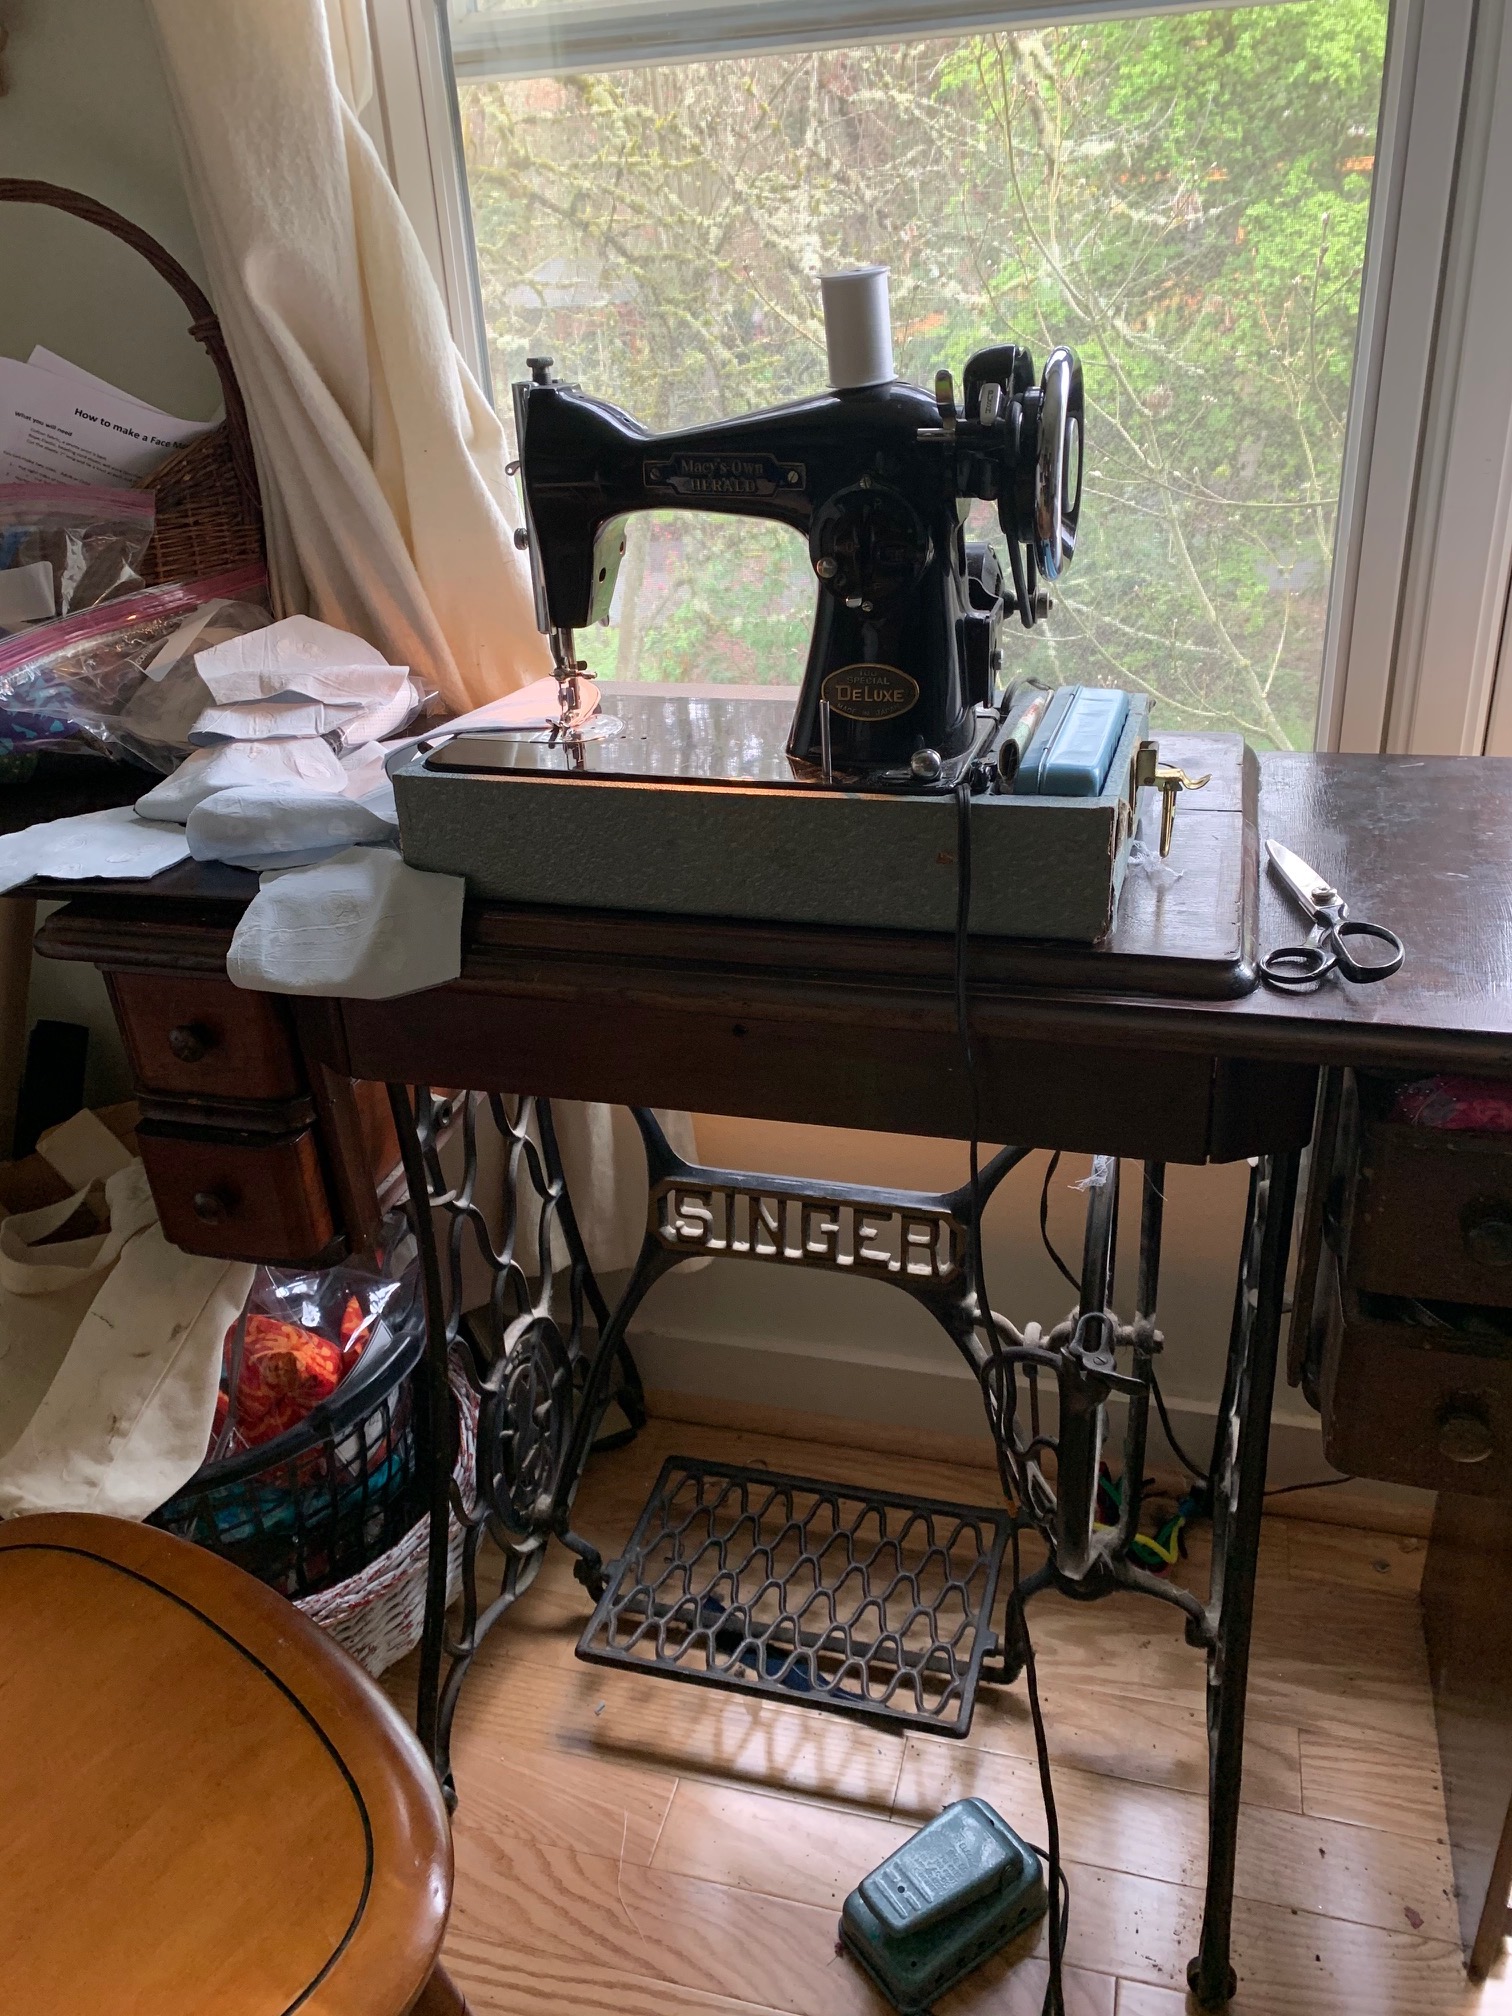 Jeanne Robin's sewing machine in front of a window